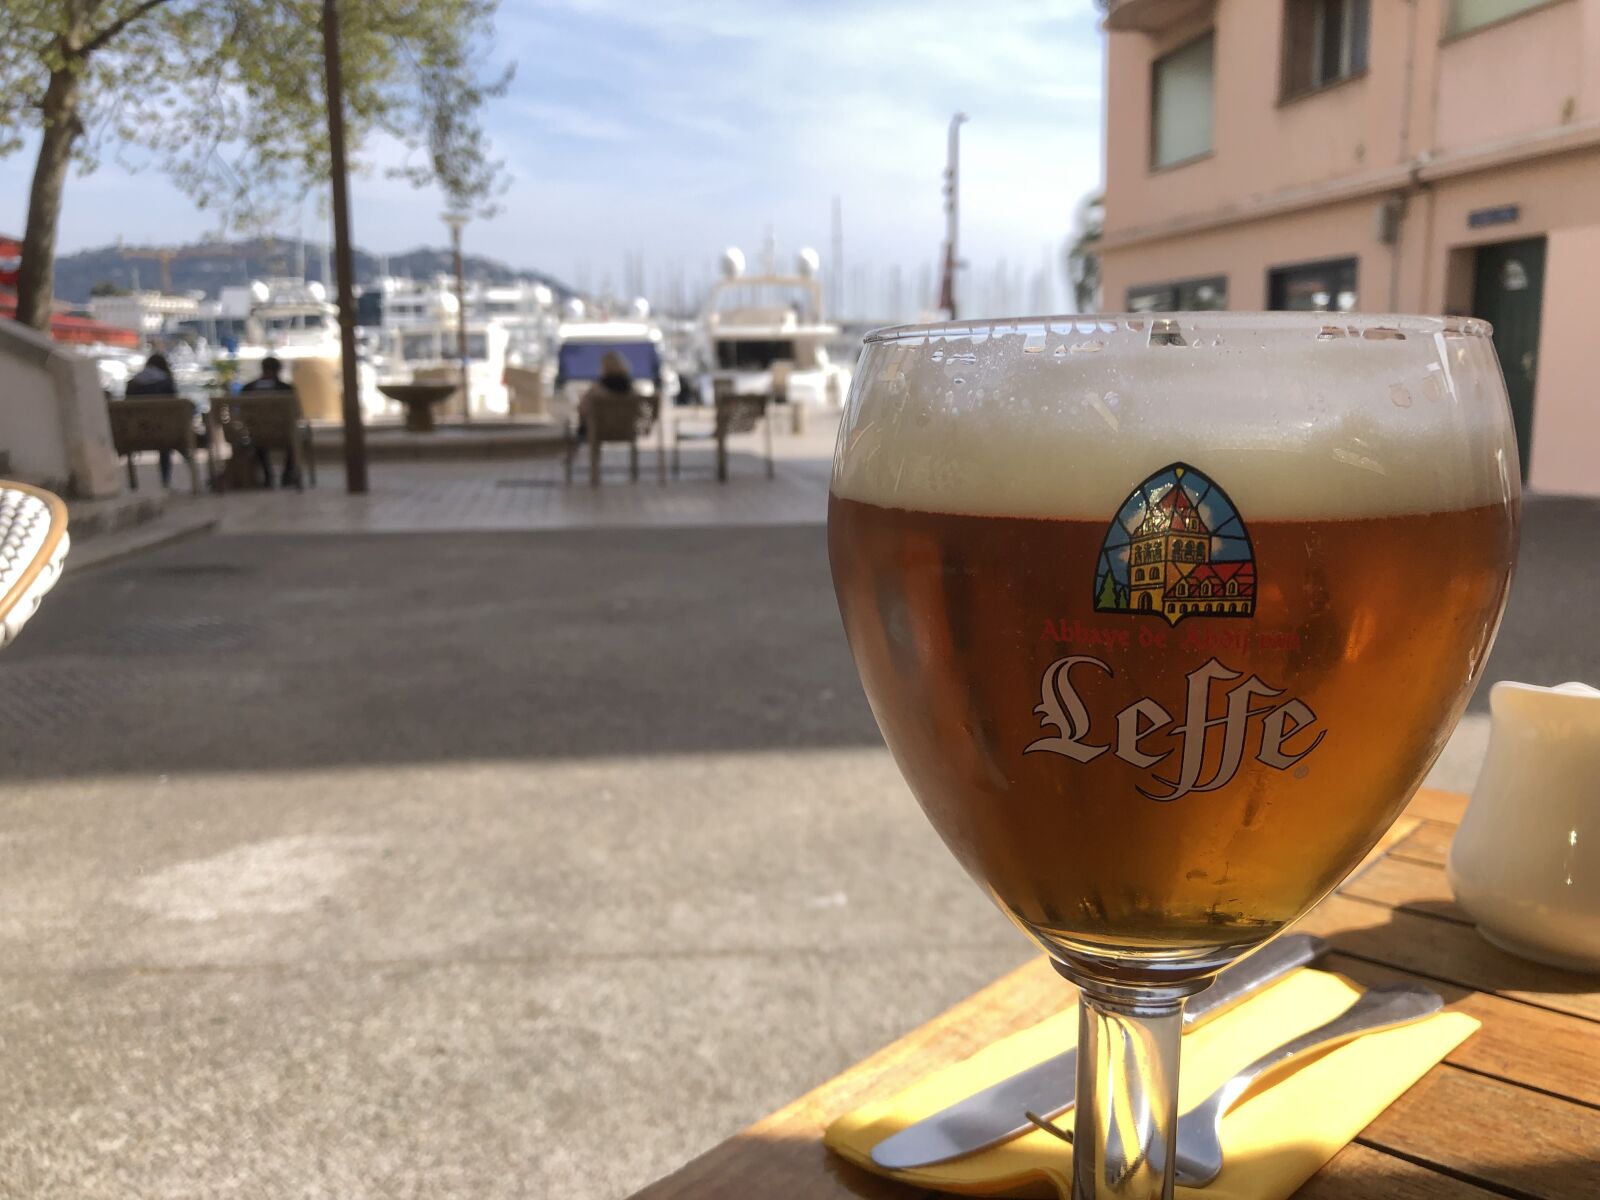 Apple iPhone X + iPhone X back dual camera 4mm f/1.8 sample photo. Beer, leffe, bar photography